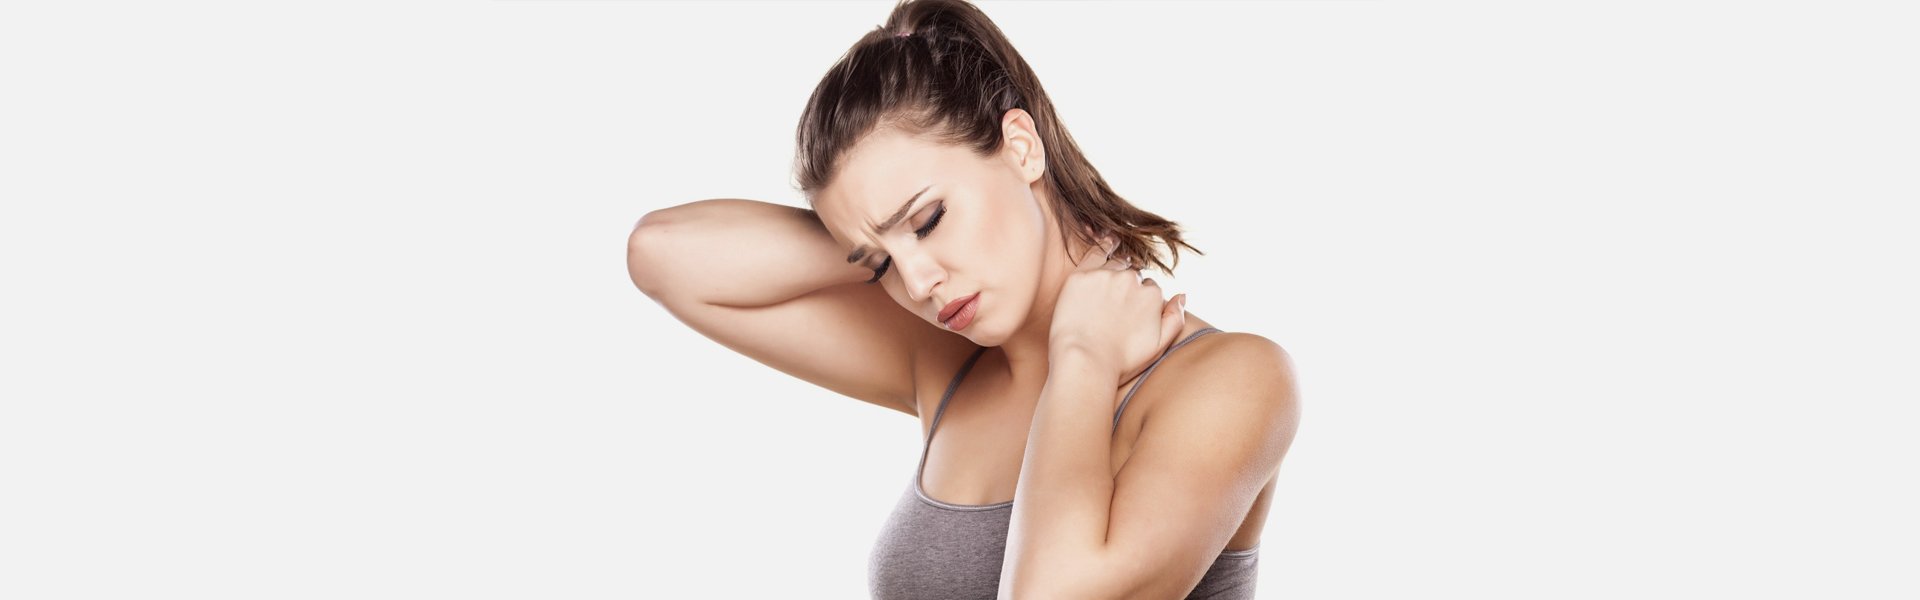 How to Relieve Headaches and Neck Pain